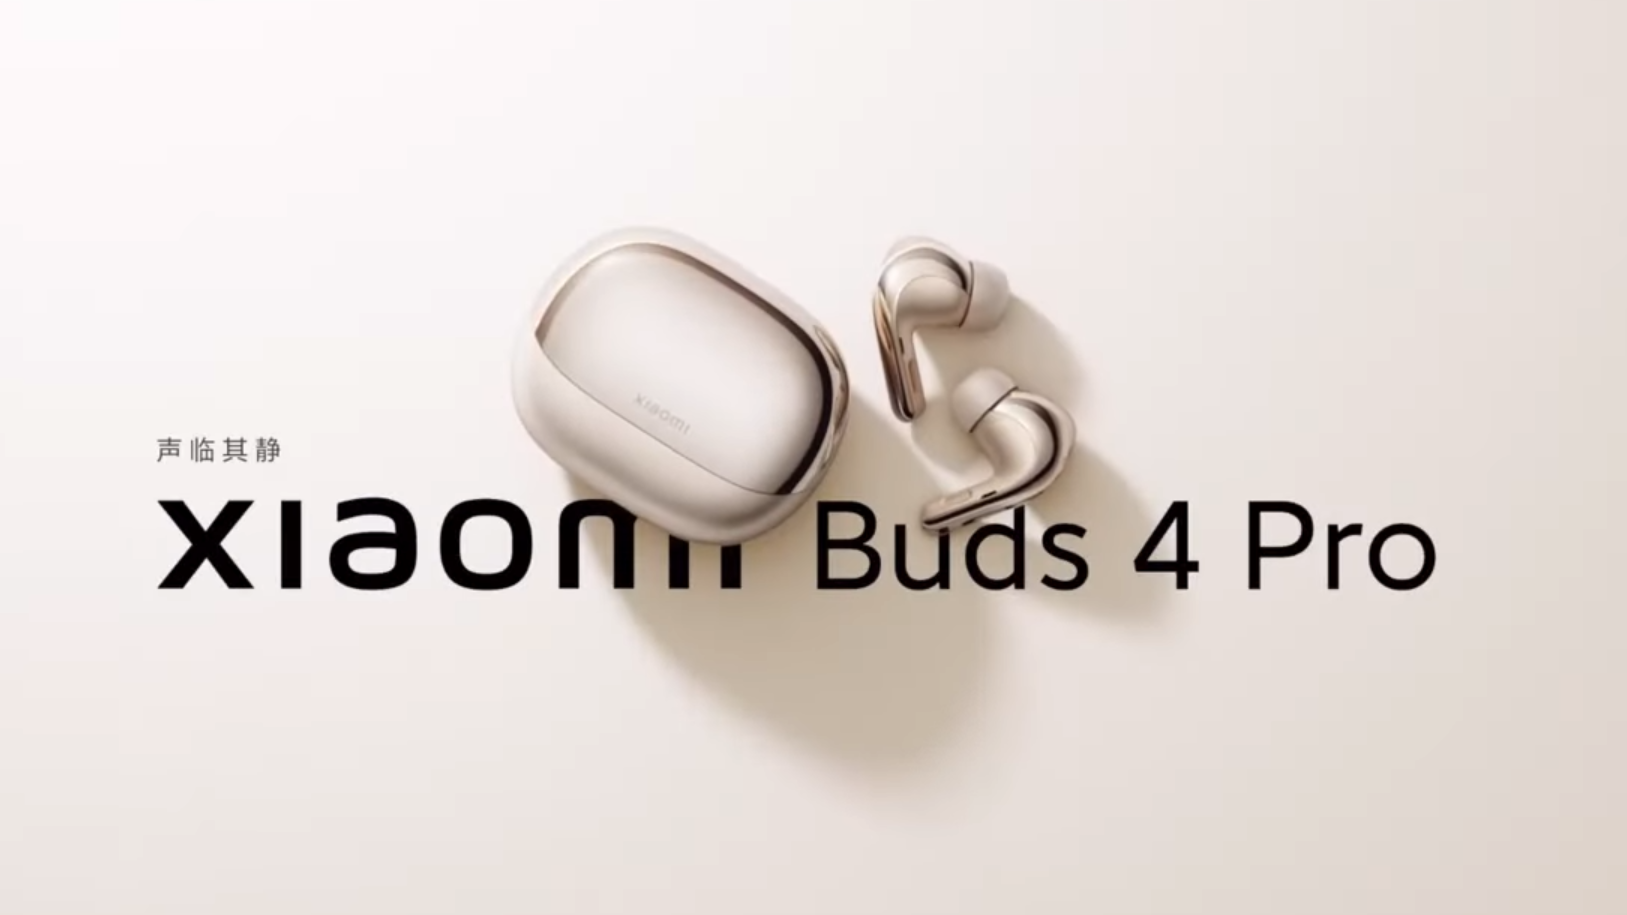 MWC 2023: Xiaomi Takes the Headphone Game to the Next Level with the  Revolutionary Buds 4 Pro! - Softonic